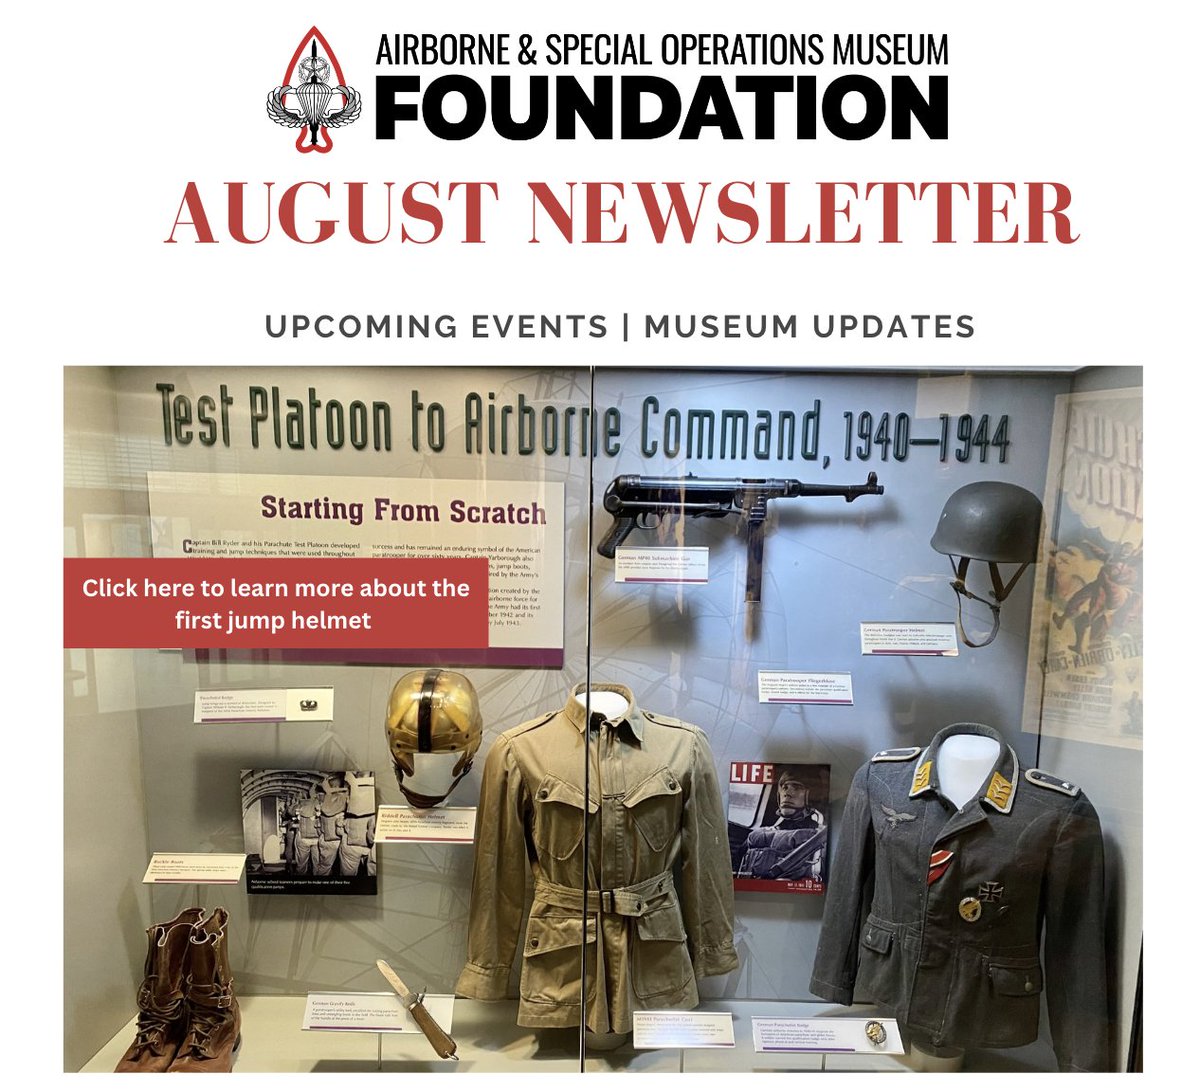 Stay up-to-date with everything happening at the Museum this month! Click here to view our August Newsletter:
mailchi.mp/asomf/august-n…

#fayettevillenc #fortliberty #museumfromhome